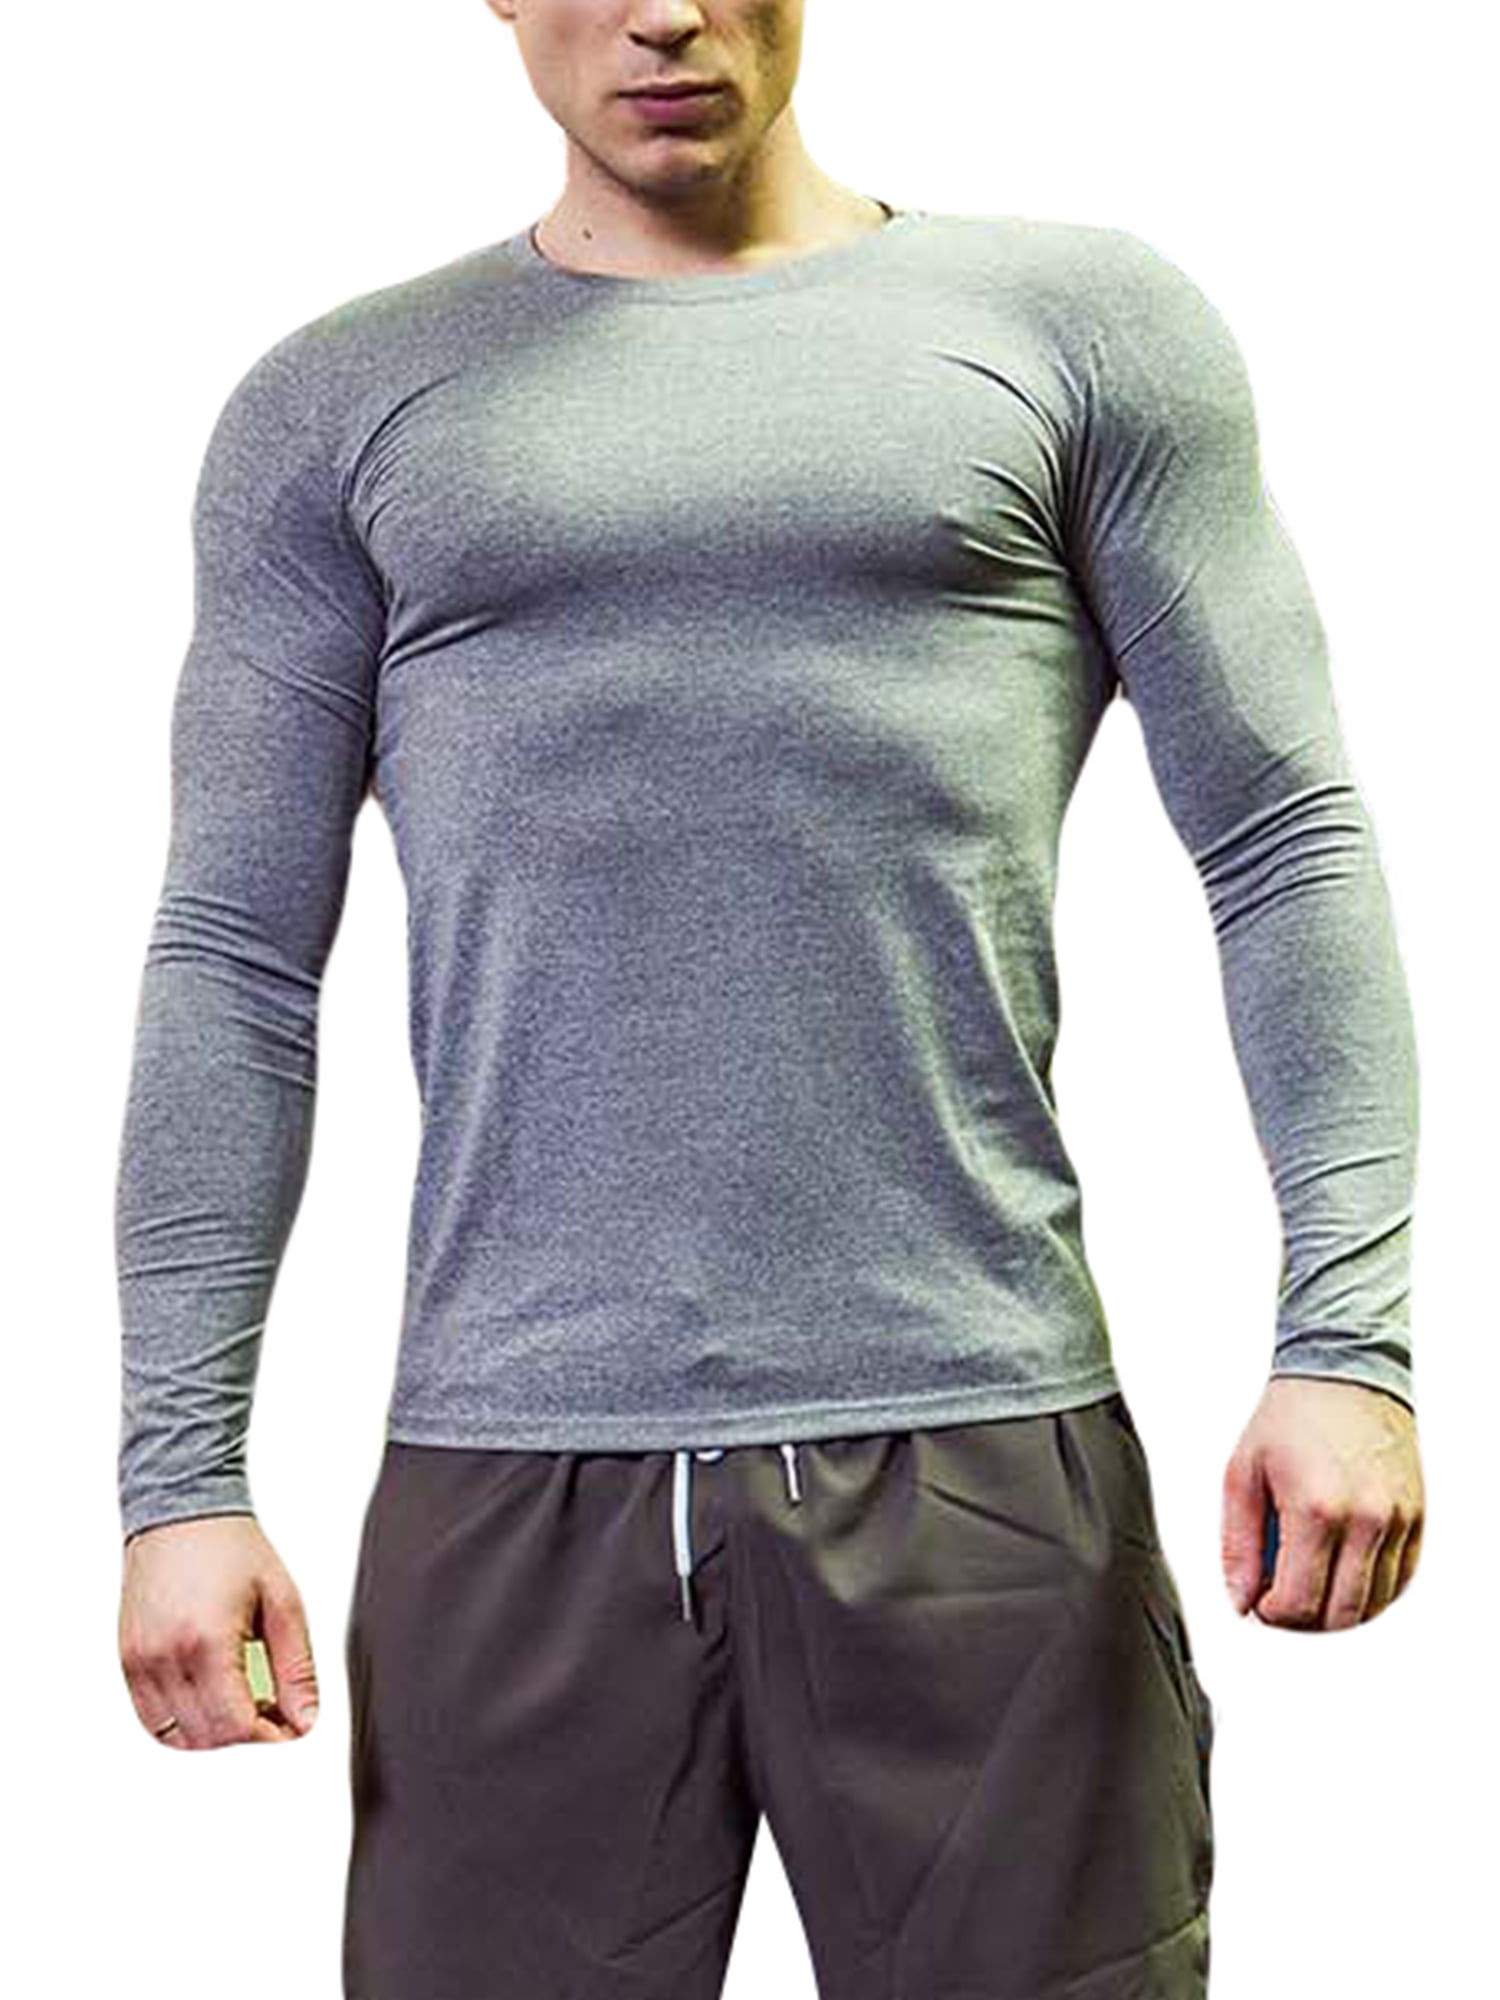 Details about   Mens Quick Dry Sports Fitness Underwear Long Sleeve Top Tight T-Shirts US FAST 